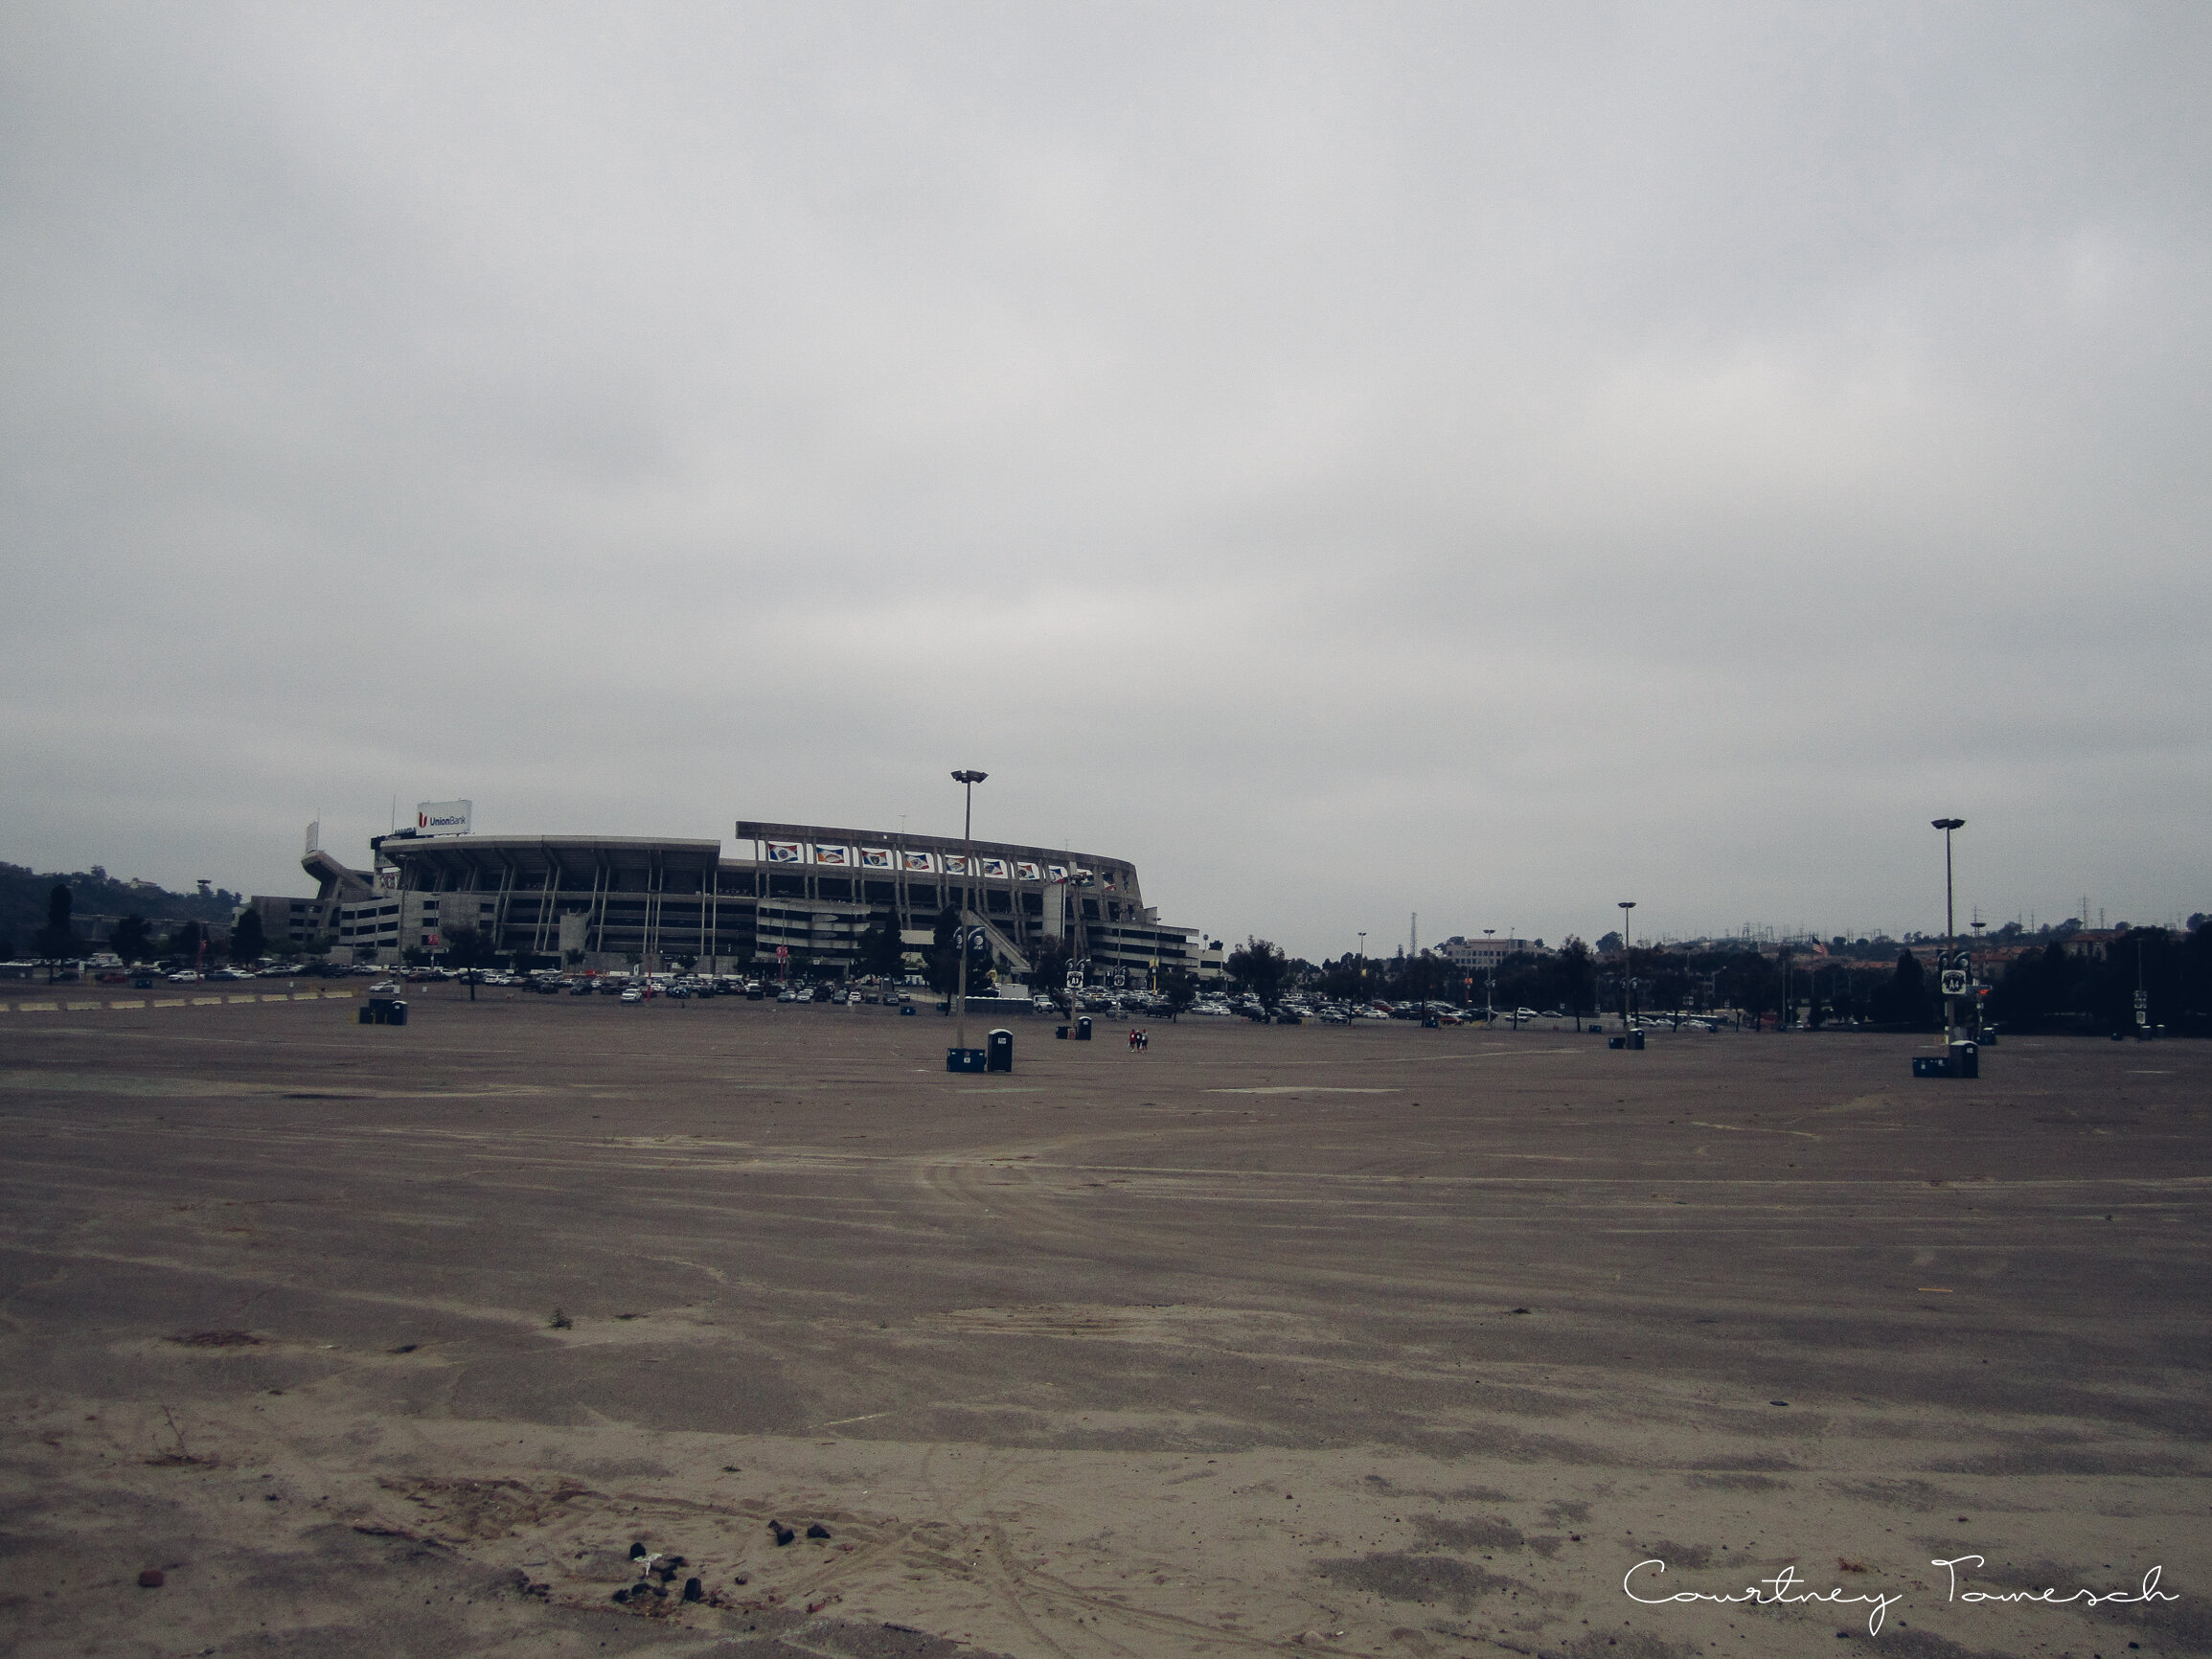 We walked the 5k to the Q! (Chargers' stadium Qualcomm)